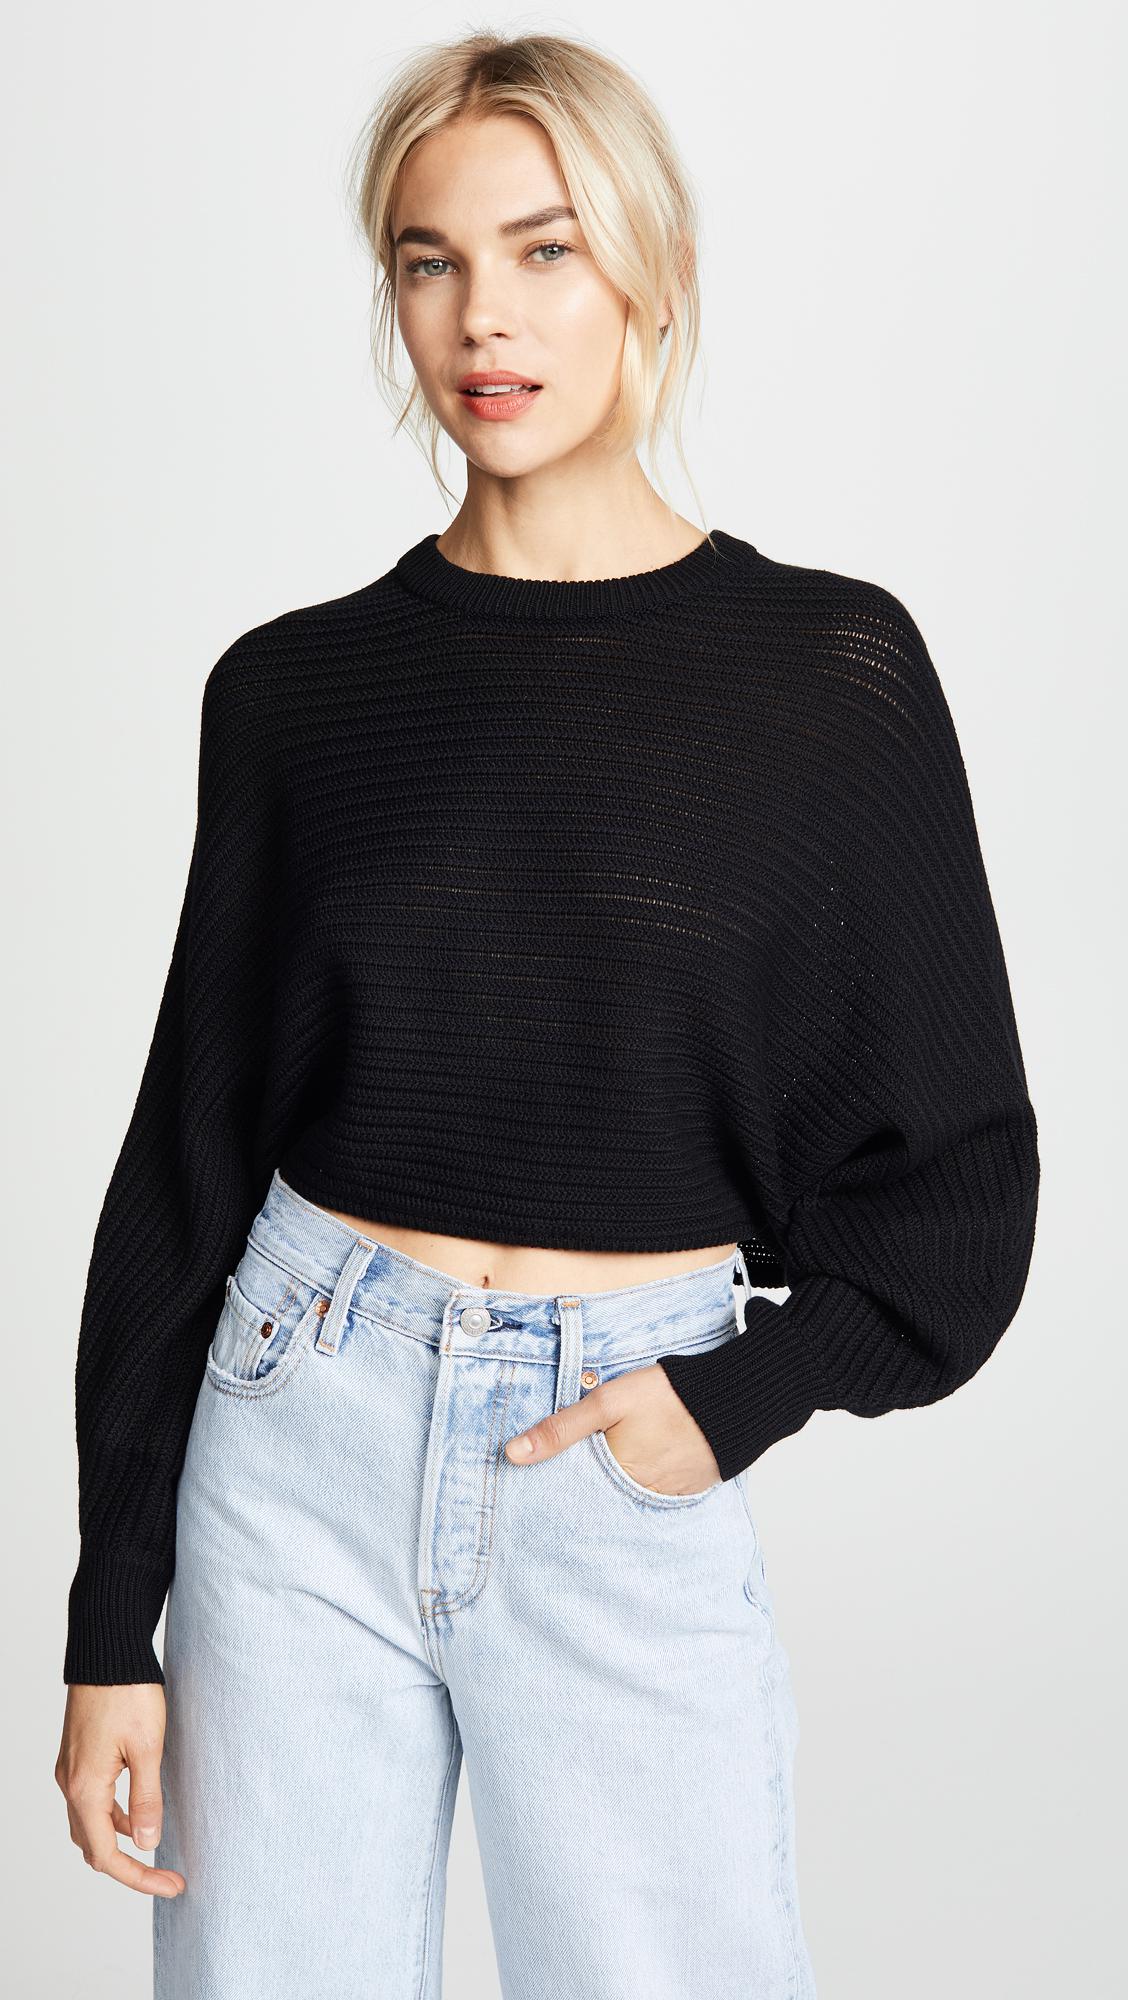 Line & Dot Synthetic Iris Cropped Sweater in Black - Lyst